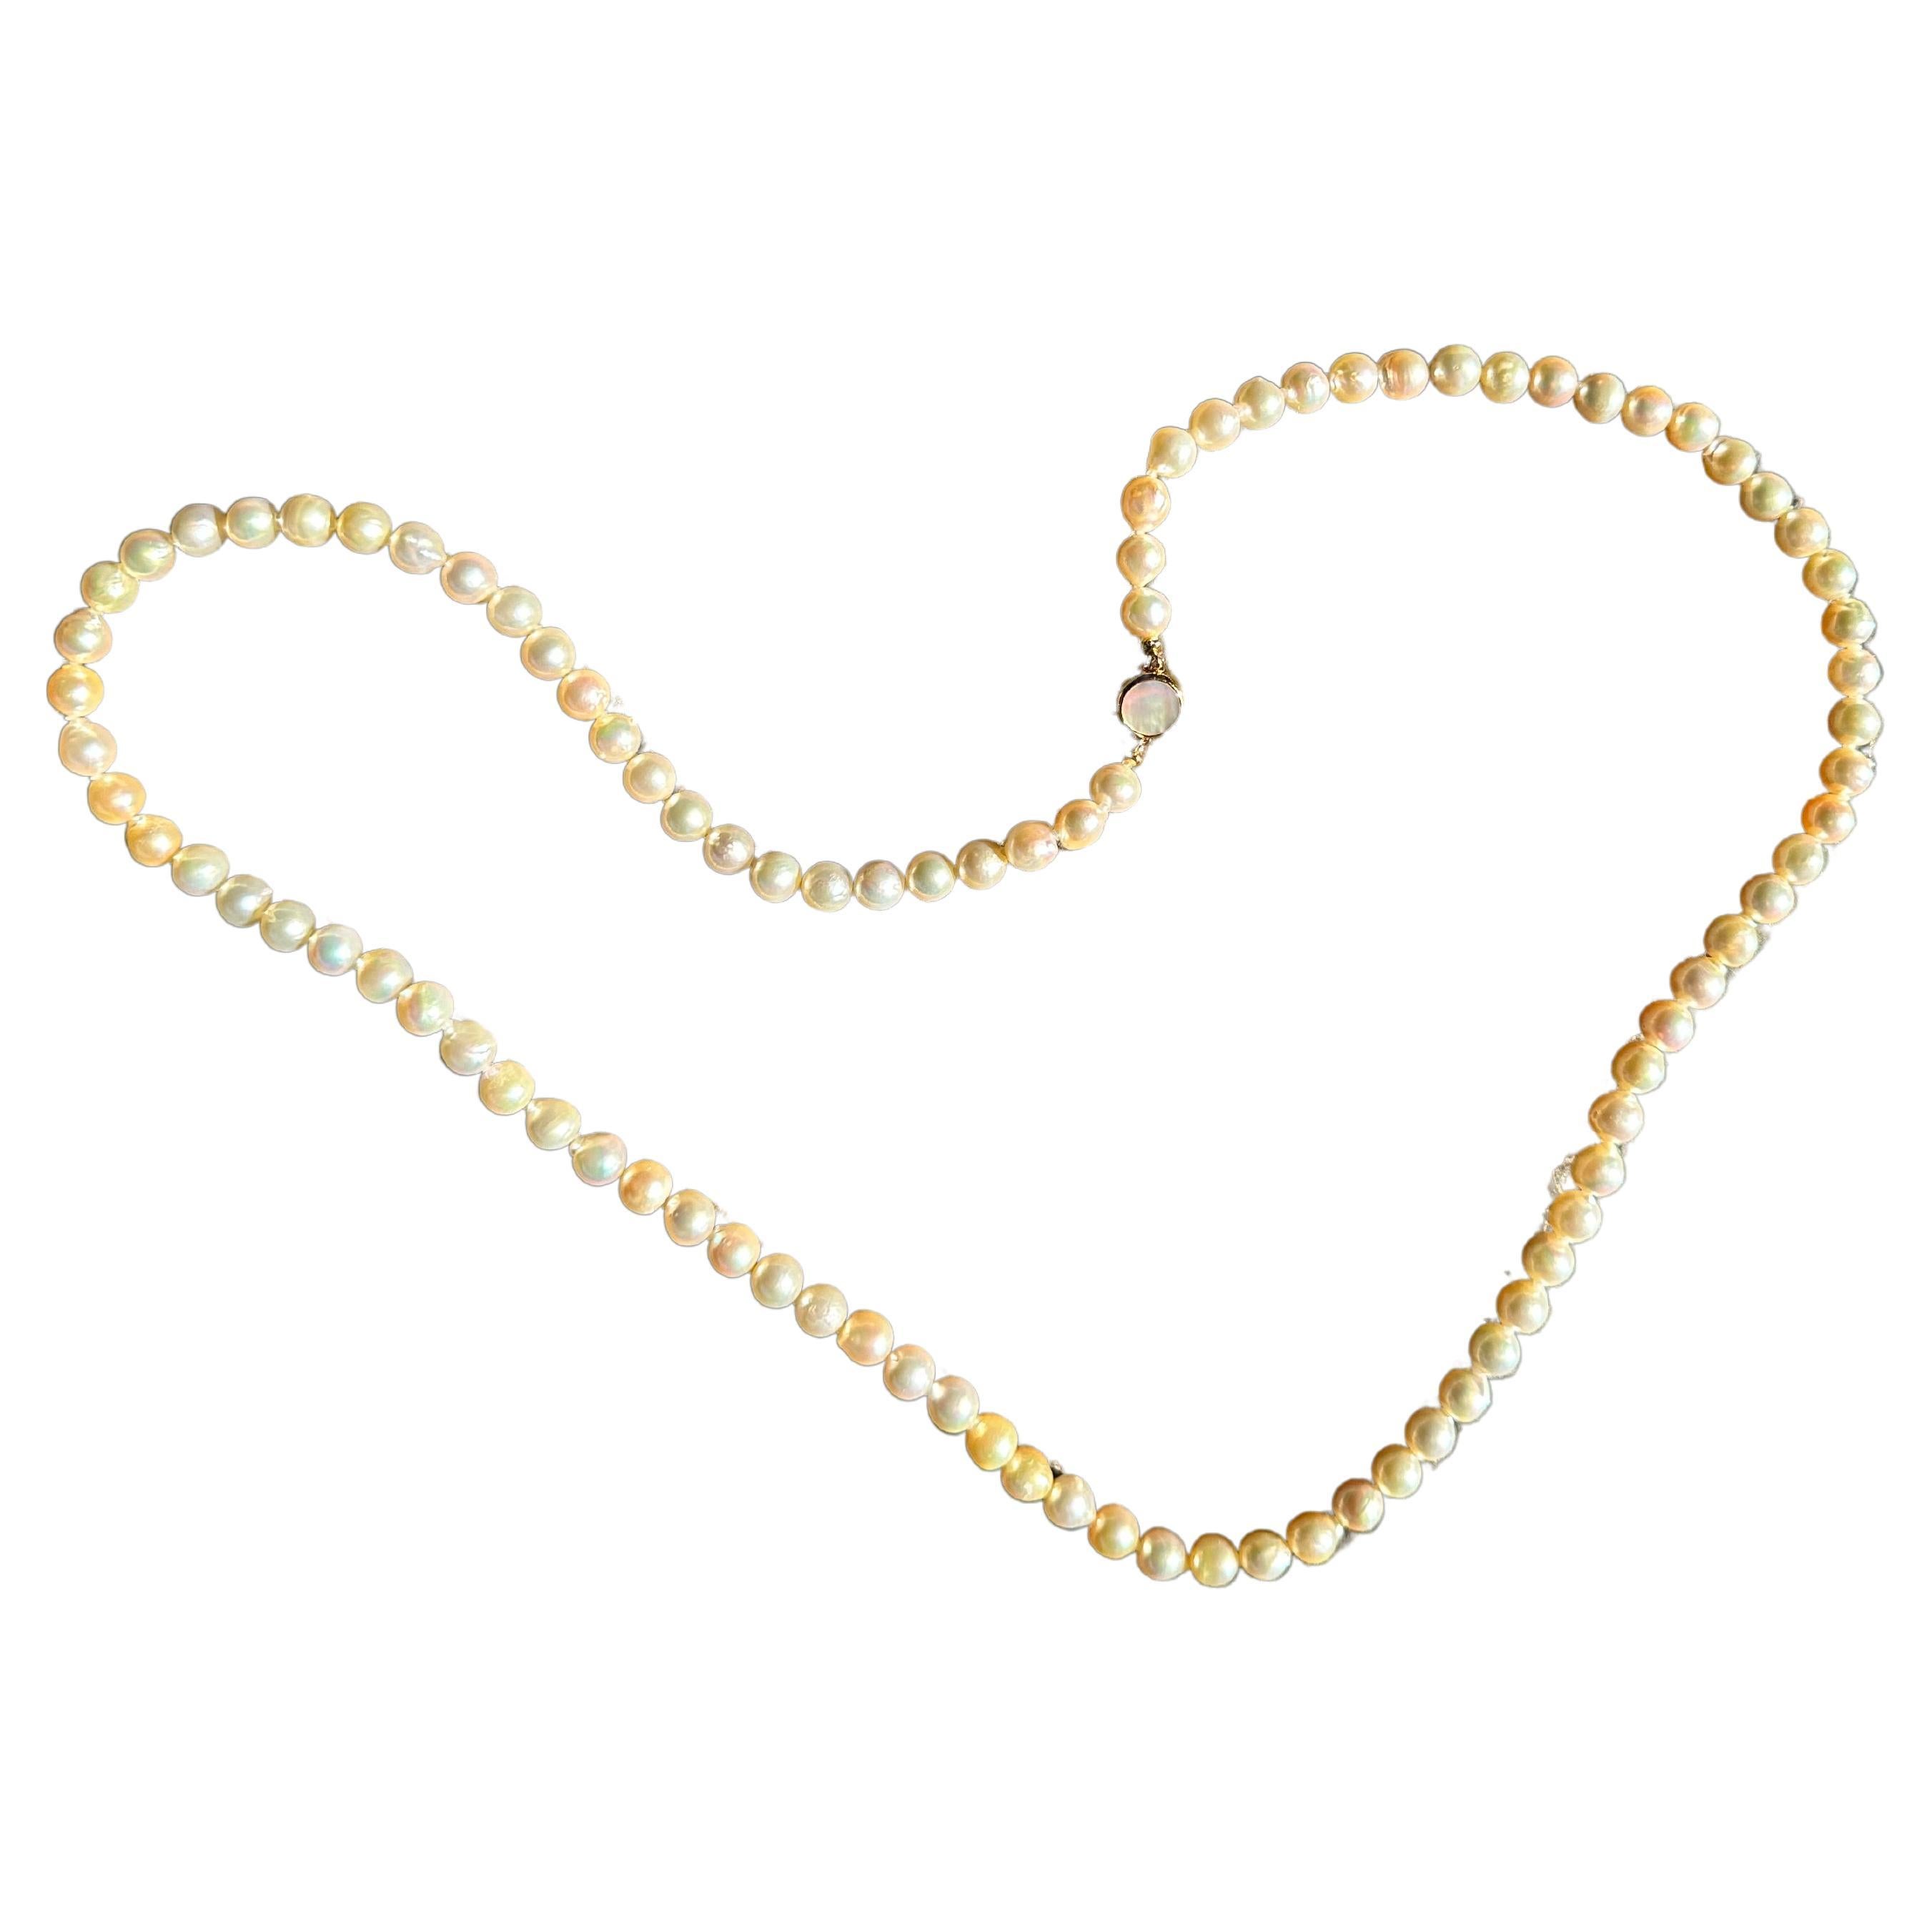 IRIS PARURE Beni Akoya 8.5mm×94 Pearl Necklace, Non Colored & Non Bleached Pearl For Sale